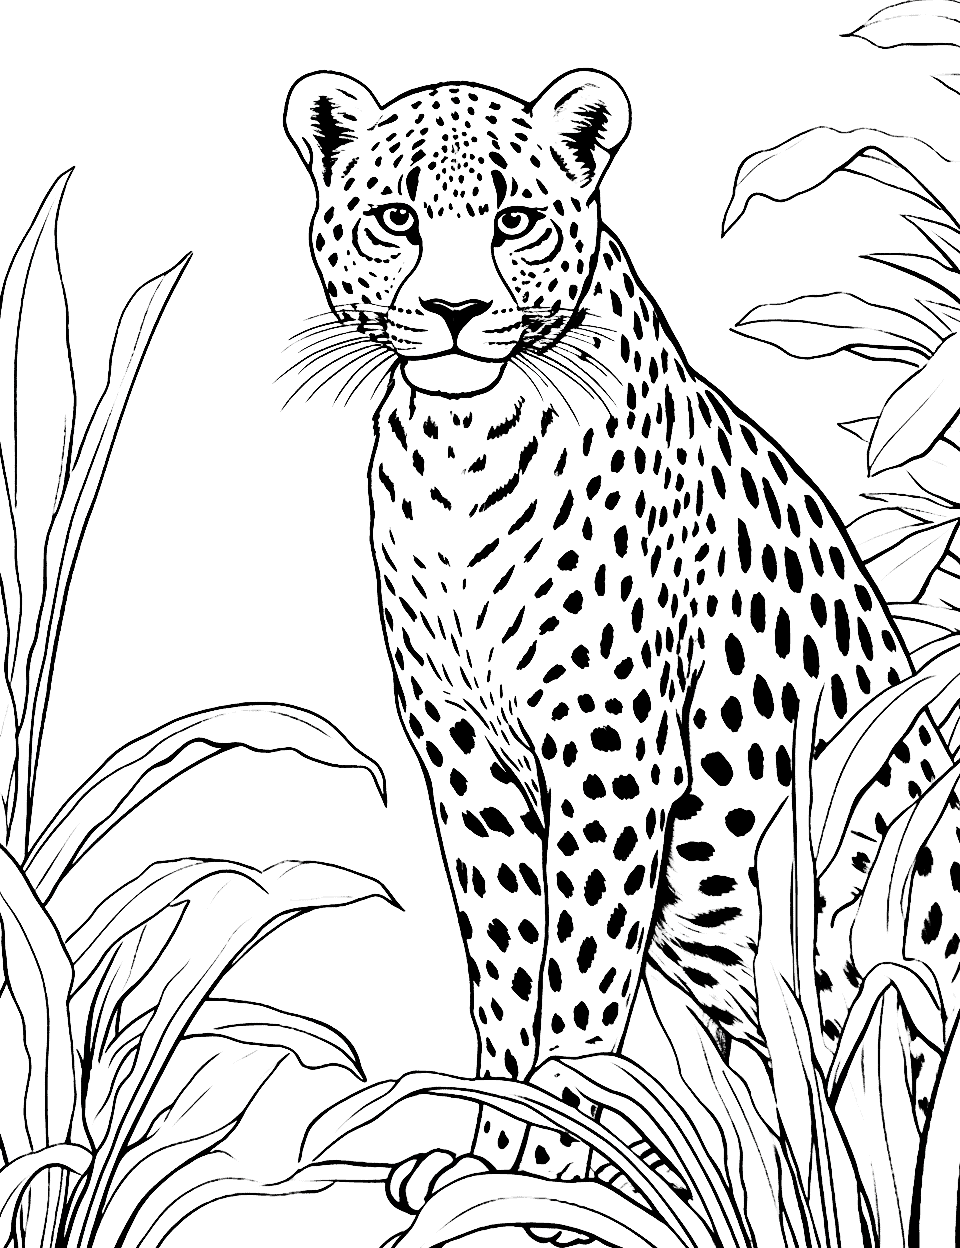 Cheetah in a Jungle Setting Coloring Page - A cheetah stealthily moving through a jungle environment.